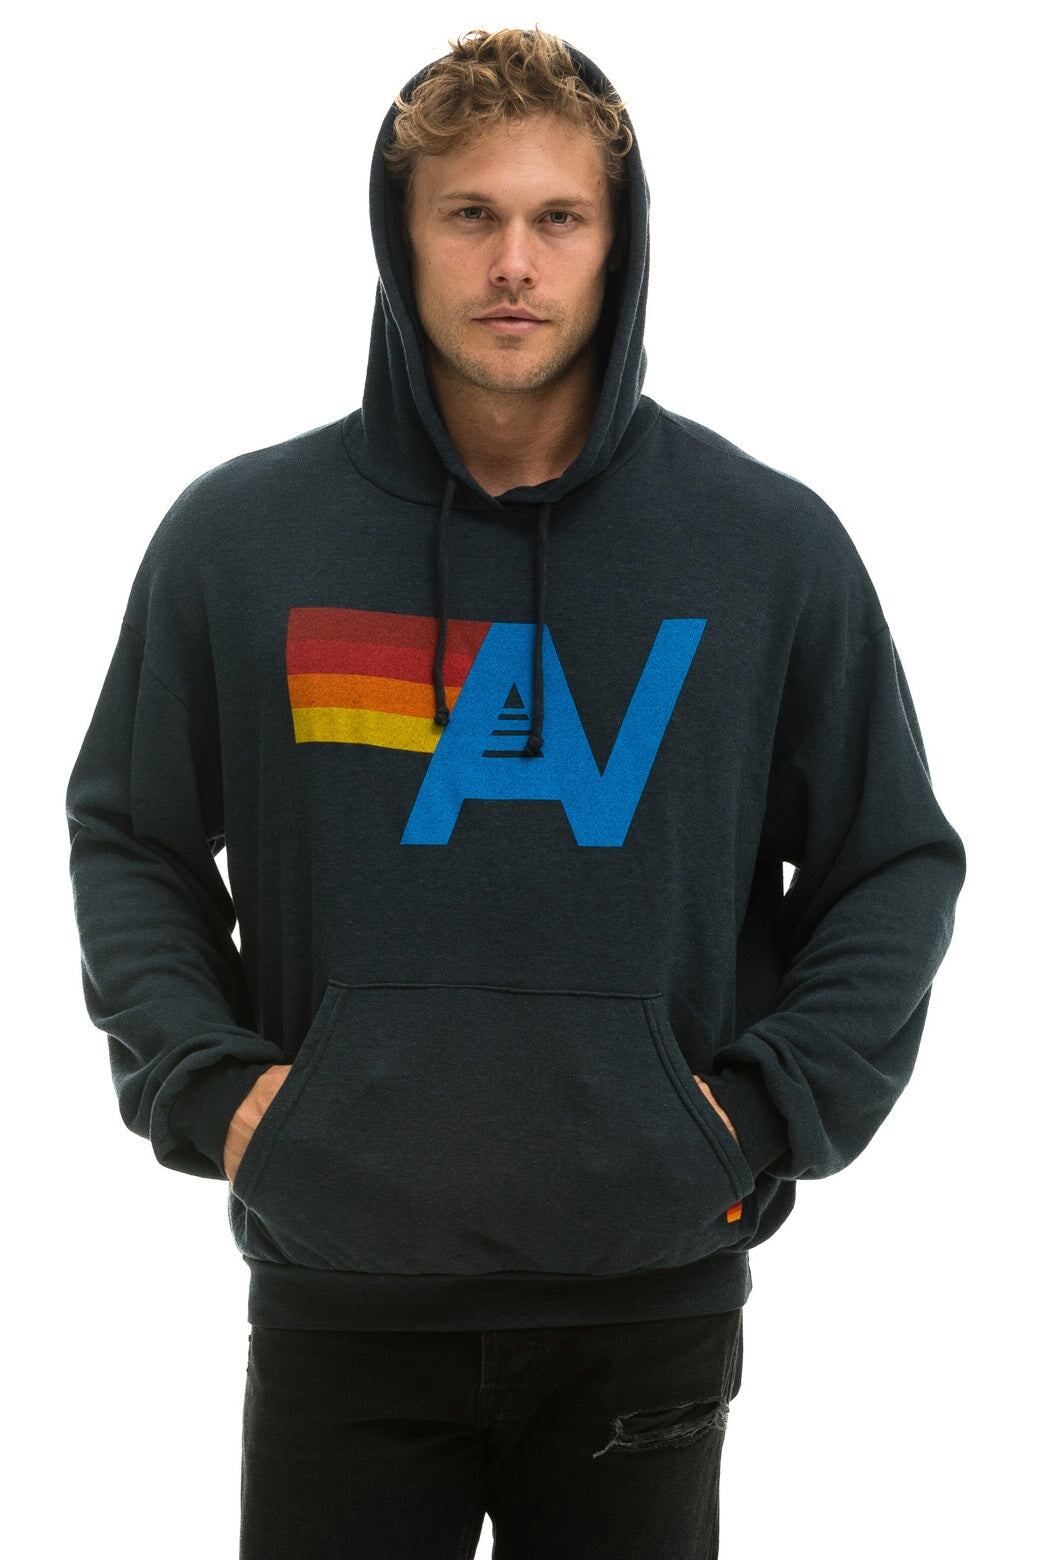 LOGO PULLOVER RELAXED HOODIE - CHARCOAL Hoodie Aviator Nation 